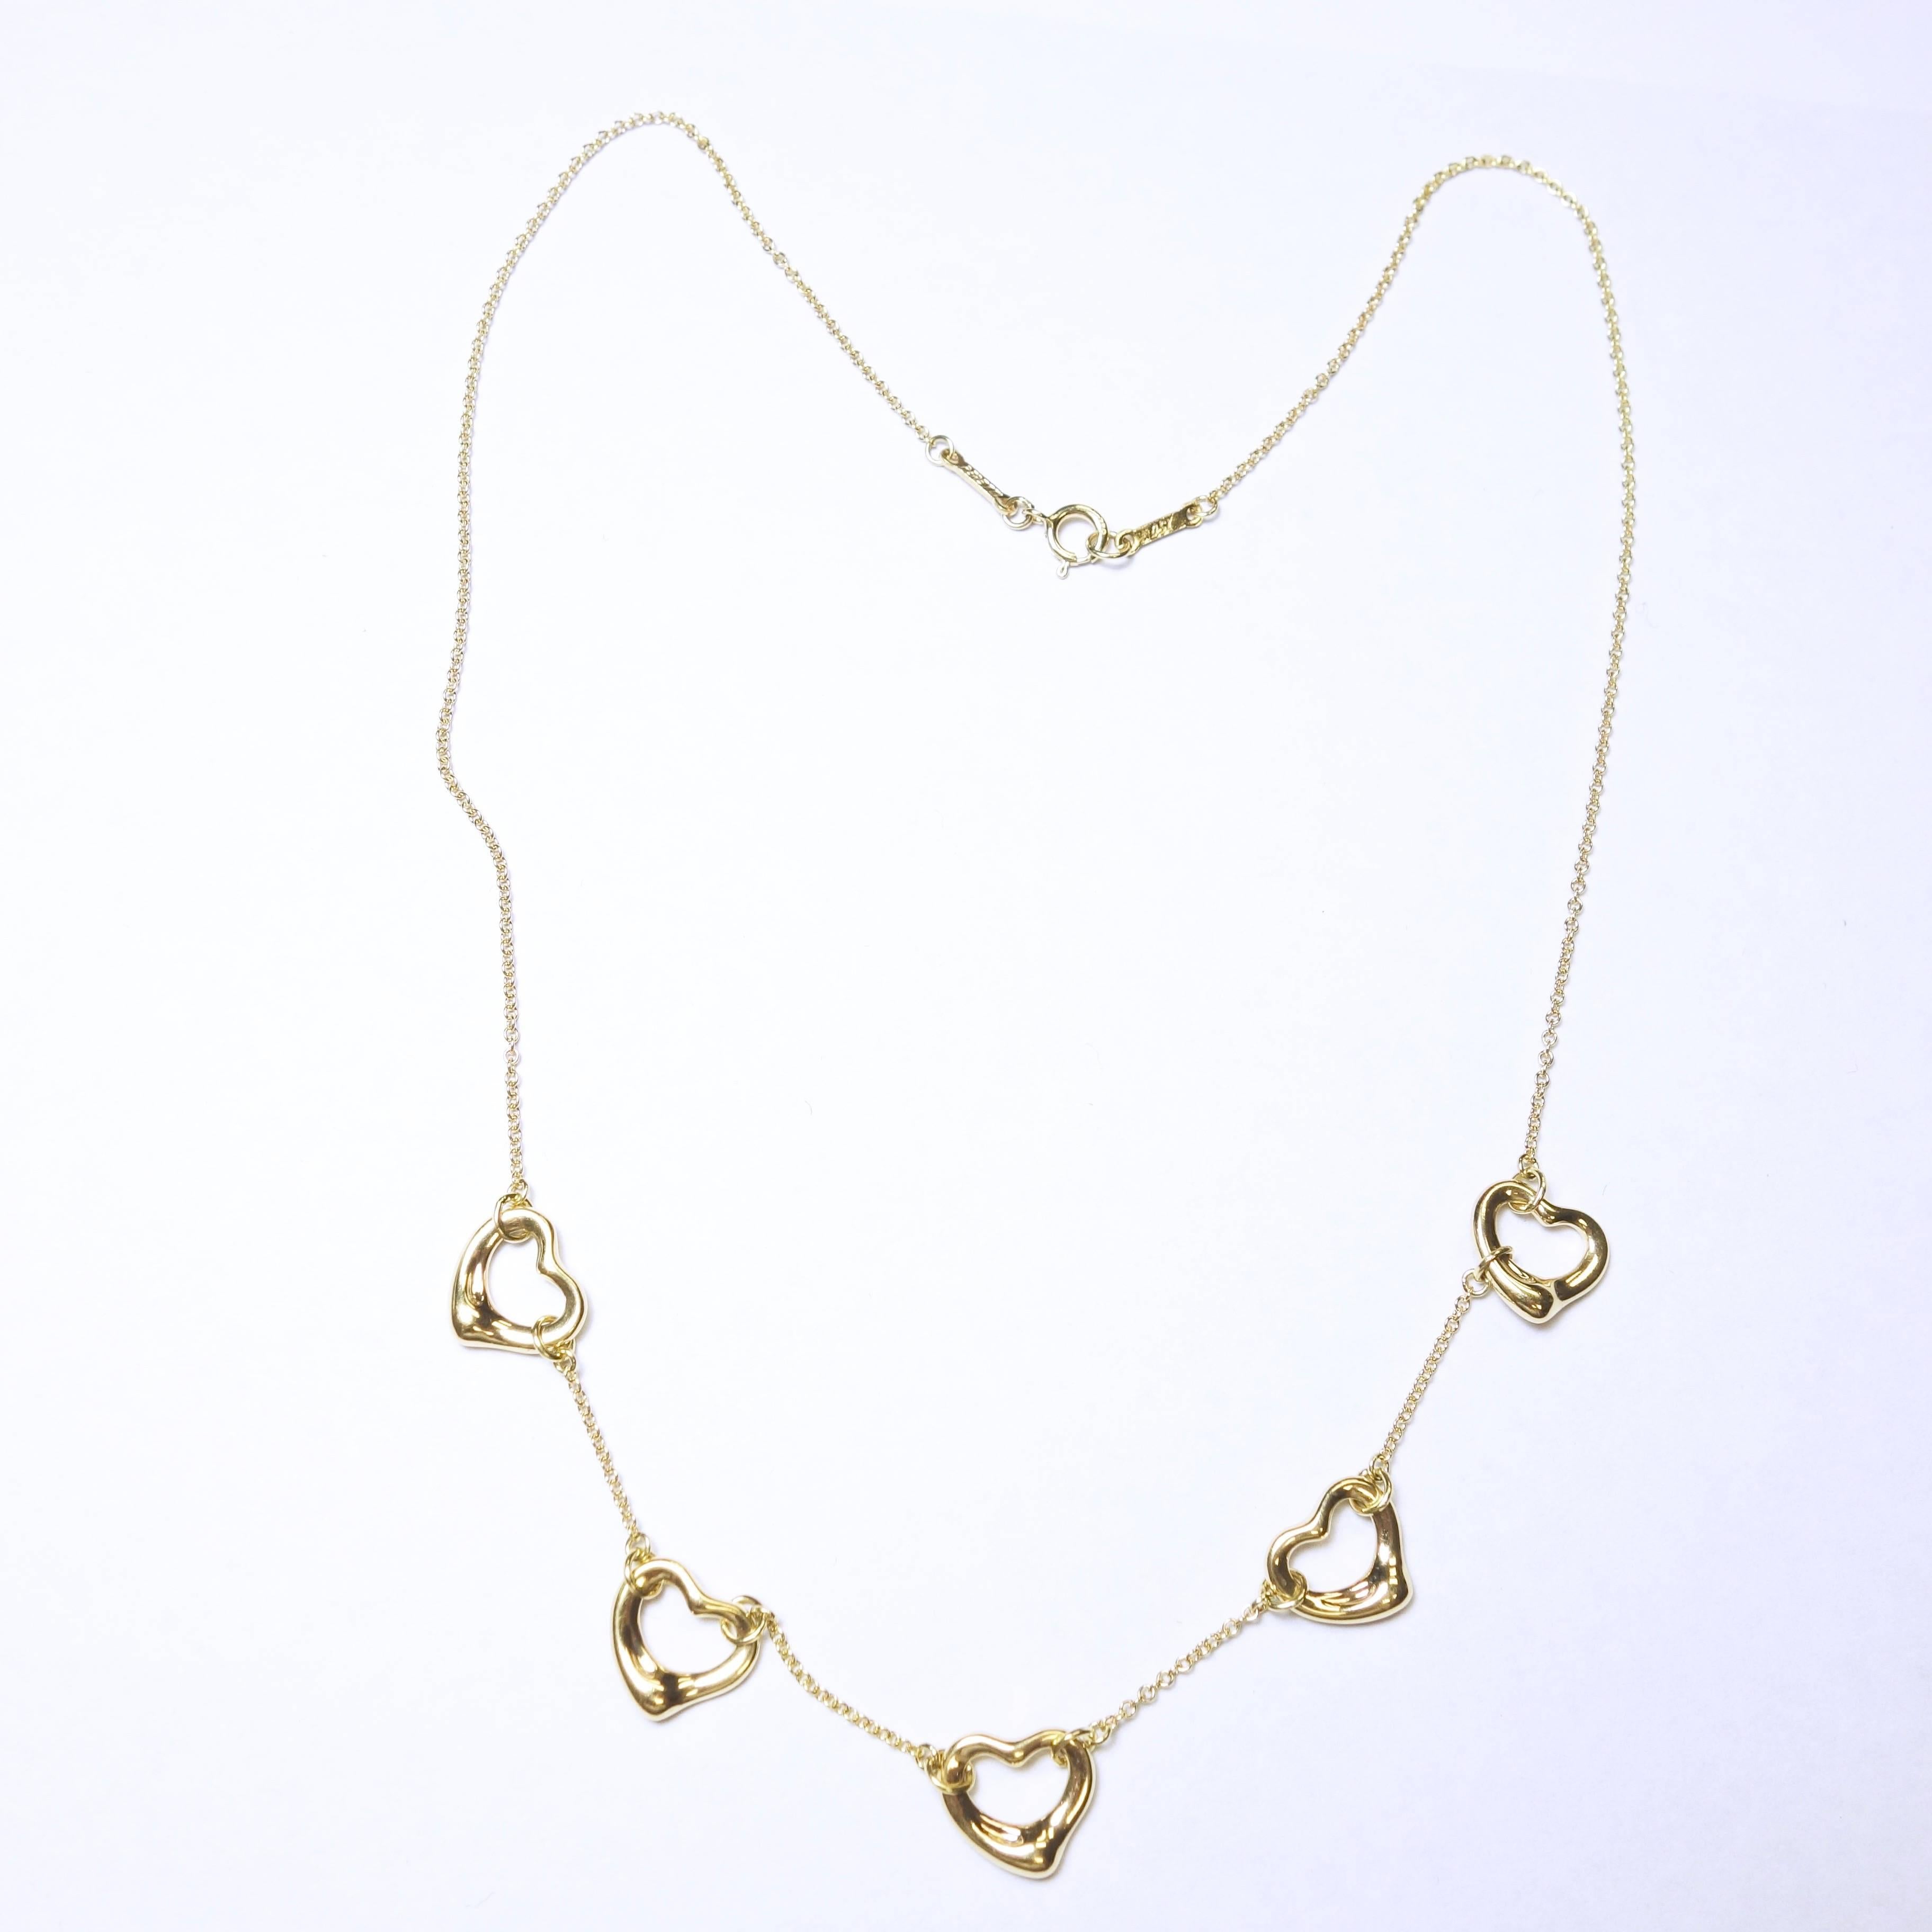 Here's a open heart yellow gold necklace from TIFFANY & Co by ELSA PERETTI Five open hearts necklace in 18K yellow gold. Made in Spain
Length: 16 inches.
5 HEARTS PENDANT, each measures approx. 11mm wide x 9.6mm long
HALLMARKED: TIFFANY & CO,